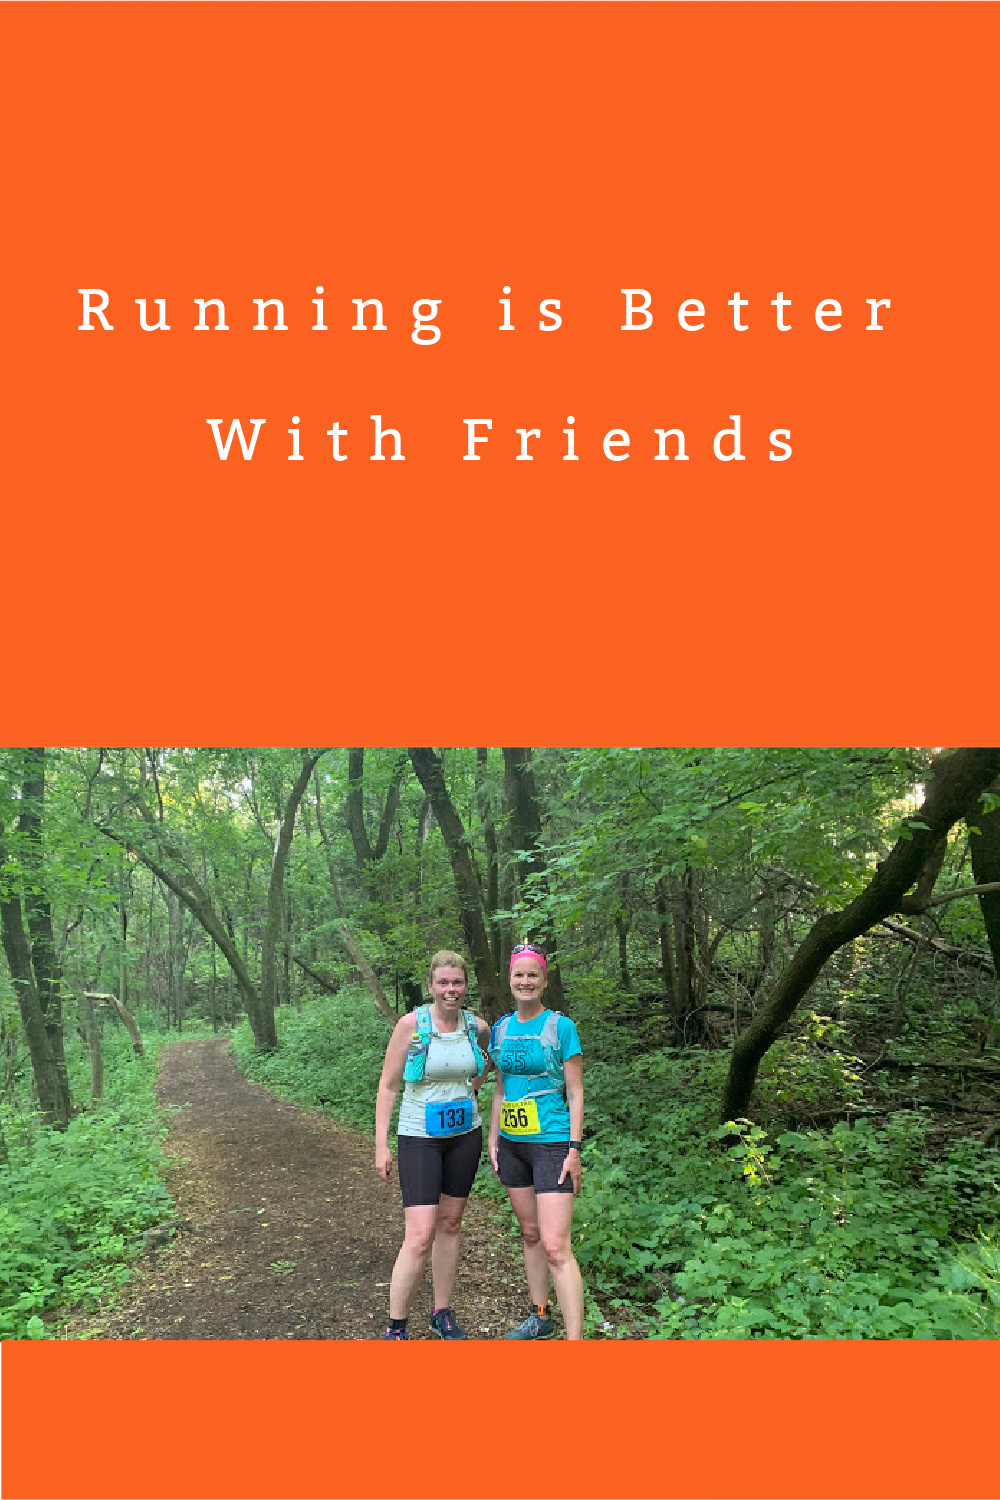 Reasons Why Running is Better with Friends